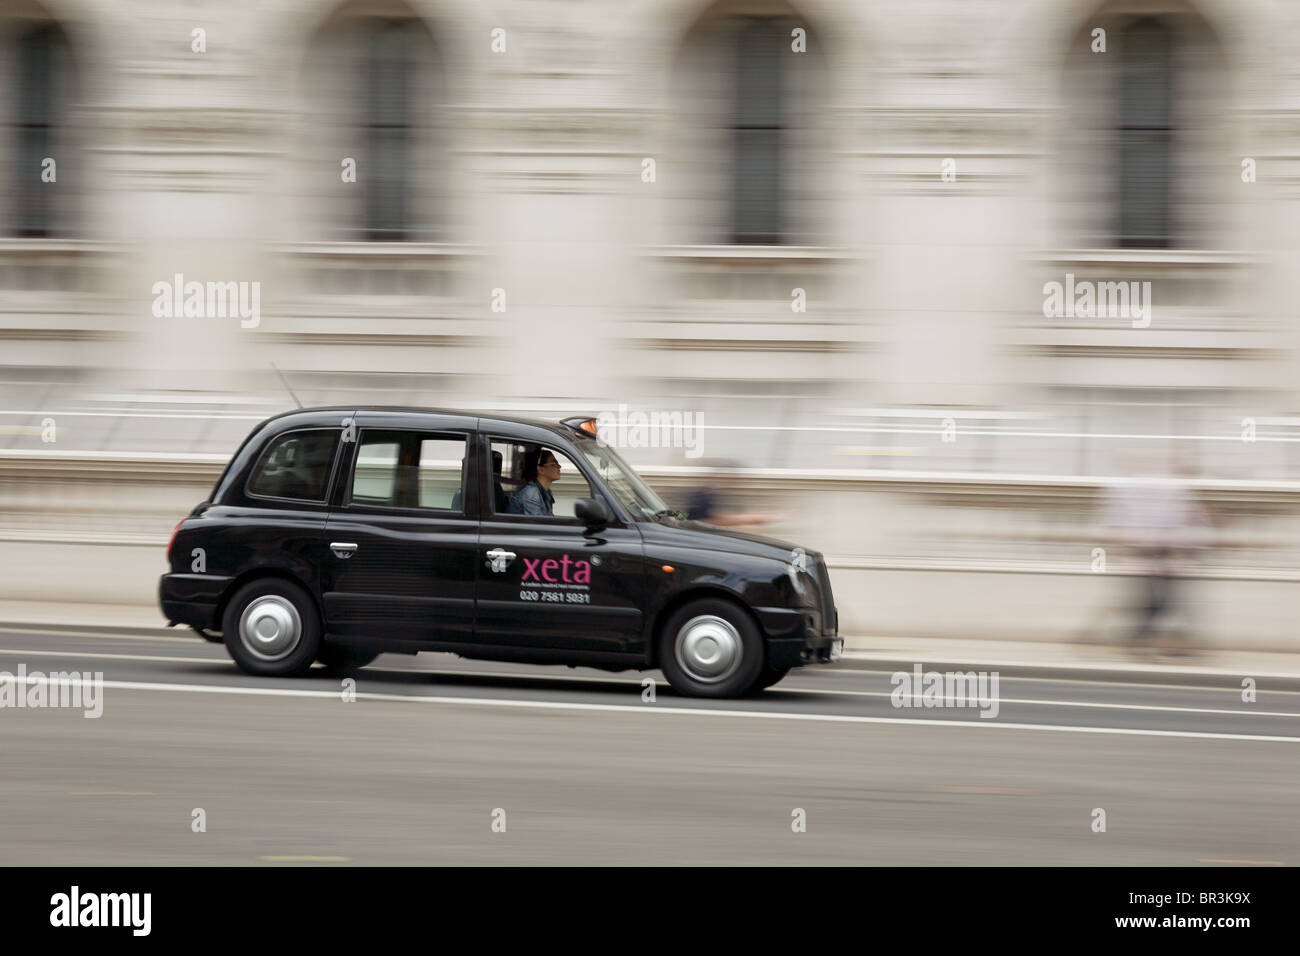 Taxi at speed in Central London Stock Photo